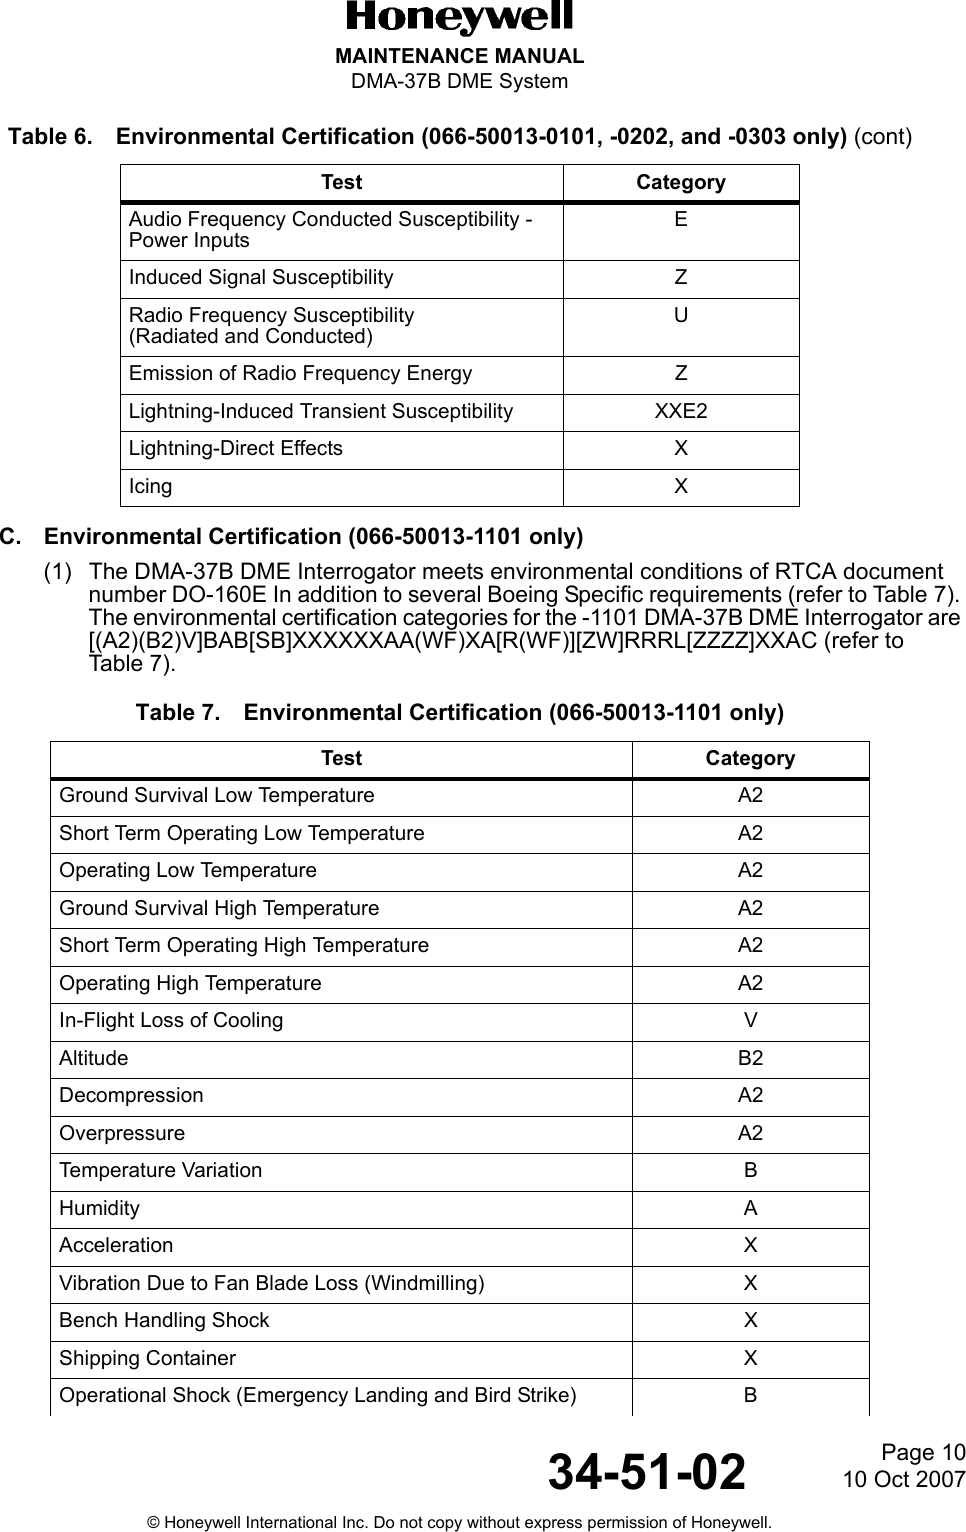 Page 1010 Oct 200734-51-02MAINTENANCE MANUALDMA-37B DME System© Honeywell International Inc. Do not copy without express permission of Honeywell.C. Environmental Certification (066-50013-1101 only)(1) The DMA-37B DME Interrogator meets environmental conditions of RTCA document number DO-160E In addition to several Boeing Specific requirements (refer to Table 7). The environmental certification categories for the -1101 DMA-37B DME Interrogator are [(A2)(B2)V]BAB[SB]XXXXXXAA(WF)XA[R(WF)][ZW]RRRL[ZZZZ]XXAC (refer to Table 7).Audio Frequency Conducted Susceptibility - Power InputsEInduced Signal Susceptibility ZRadio Frequency Susceptibility(Radiated and Conducted)UEmission of Radio Frequency Energy ZLightning-Induced Transient Susceptibility XXE2Lightning-Direct Effects XIcing XTable 7. Environmental Certification (066-50013-1101 only)Test CategoryGround Survival Low Temperature  A2 Short Term Operating Low Temperature  A2 Operating Low Temperature  A2 Ground Survival High Temperature  A2 Short Term Operating High Temperature  A2 Operating High Temperature  A2 In-Flight Loss of Cooling  V Altitude B2 Decompression A2 Overpressure A2 Temperature Variation  B Humidity A Acceleration XVibration Due to Fan Blade Loss (Windmilling)  XBench Handling Shock  XShipping Container  XOperational Shock (Emergency Landing and Bird Strike)  B Table 6. Environmental Certification (066-50013-0101, -0202, and -0303 only) (cont)Test Category